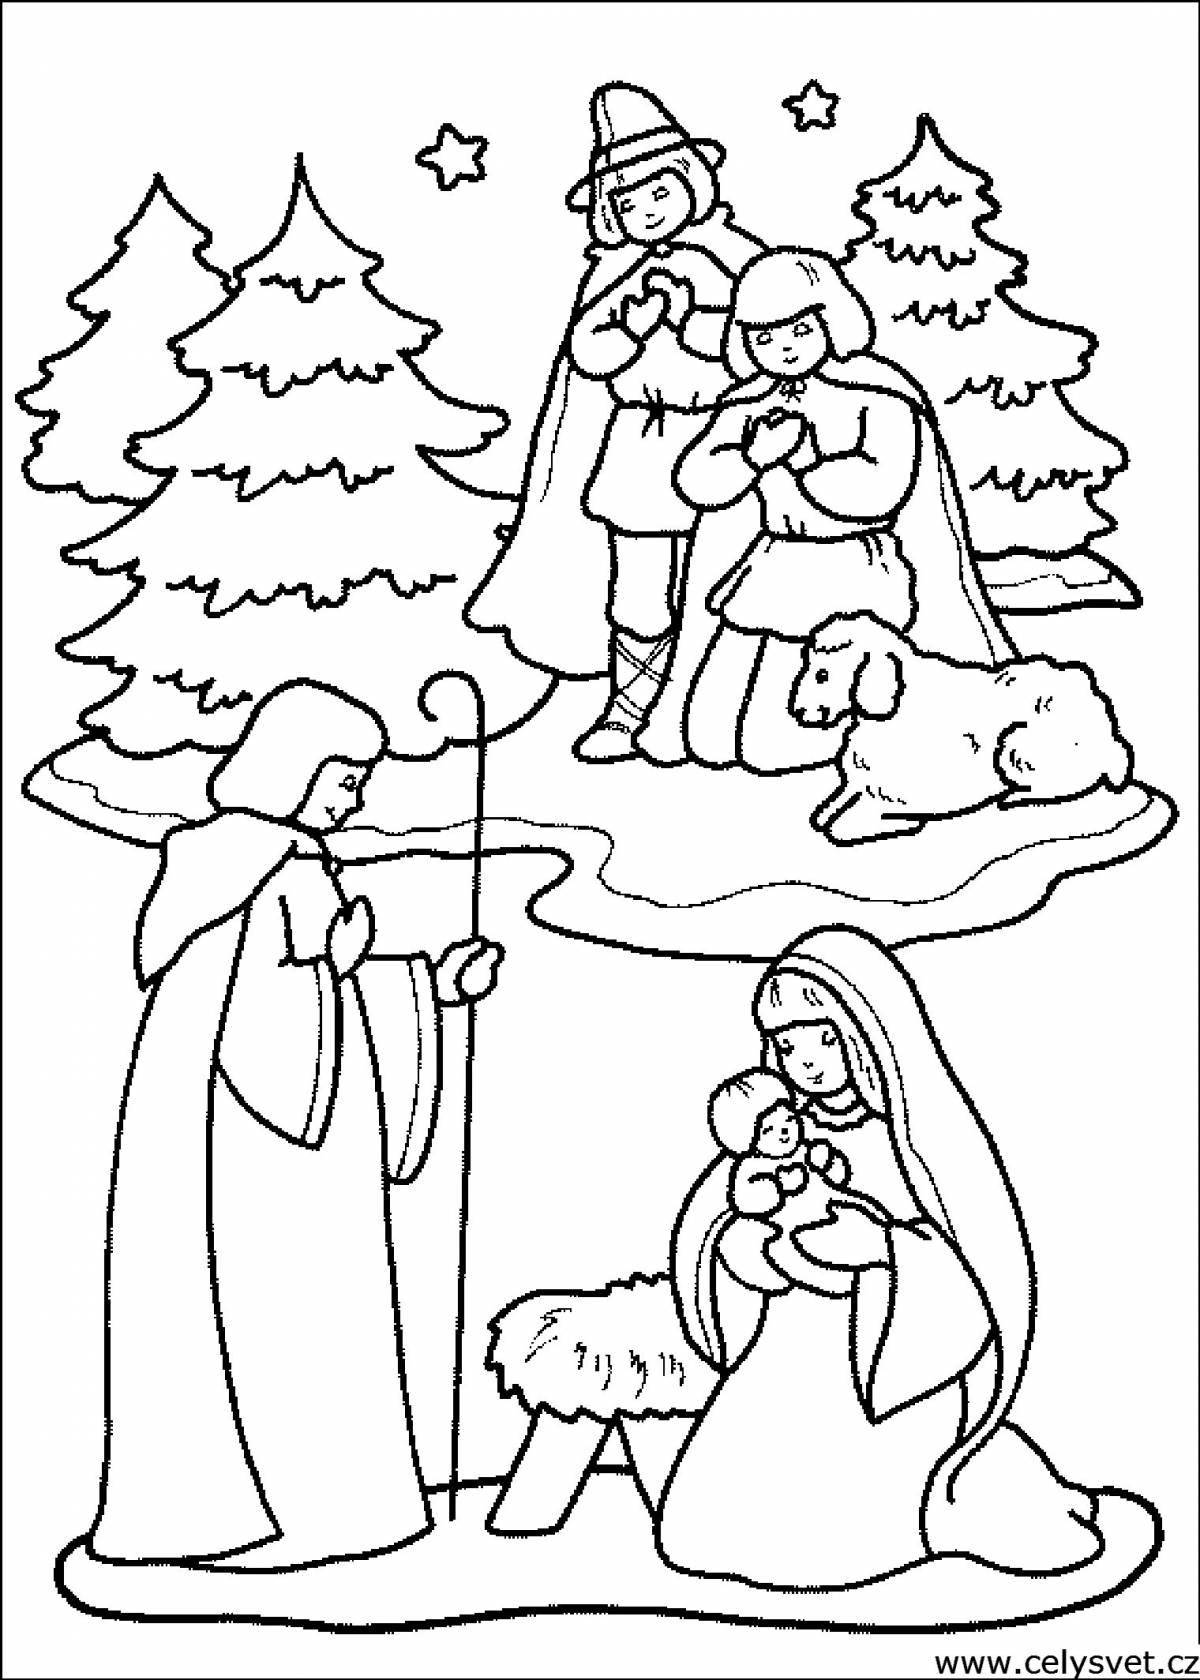 Exuberant Christmas coloring book for 3-4 year olds